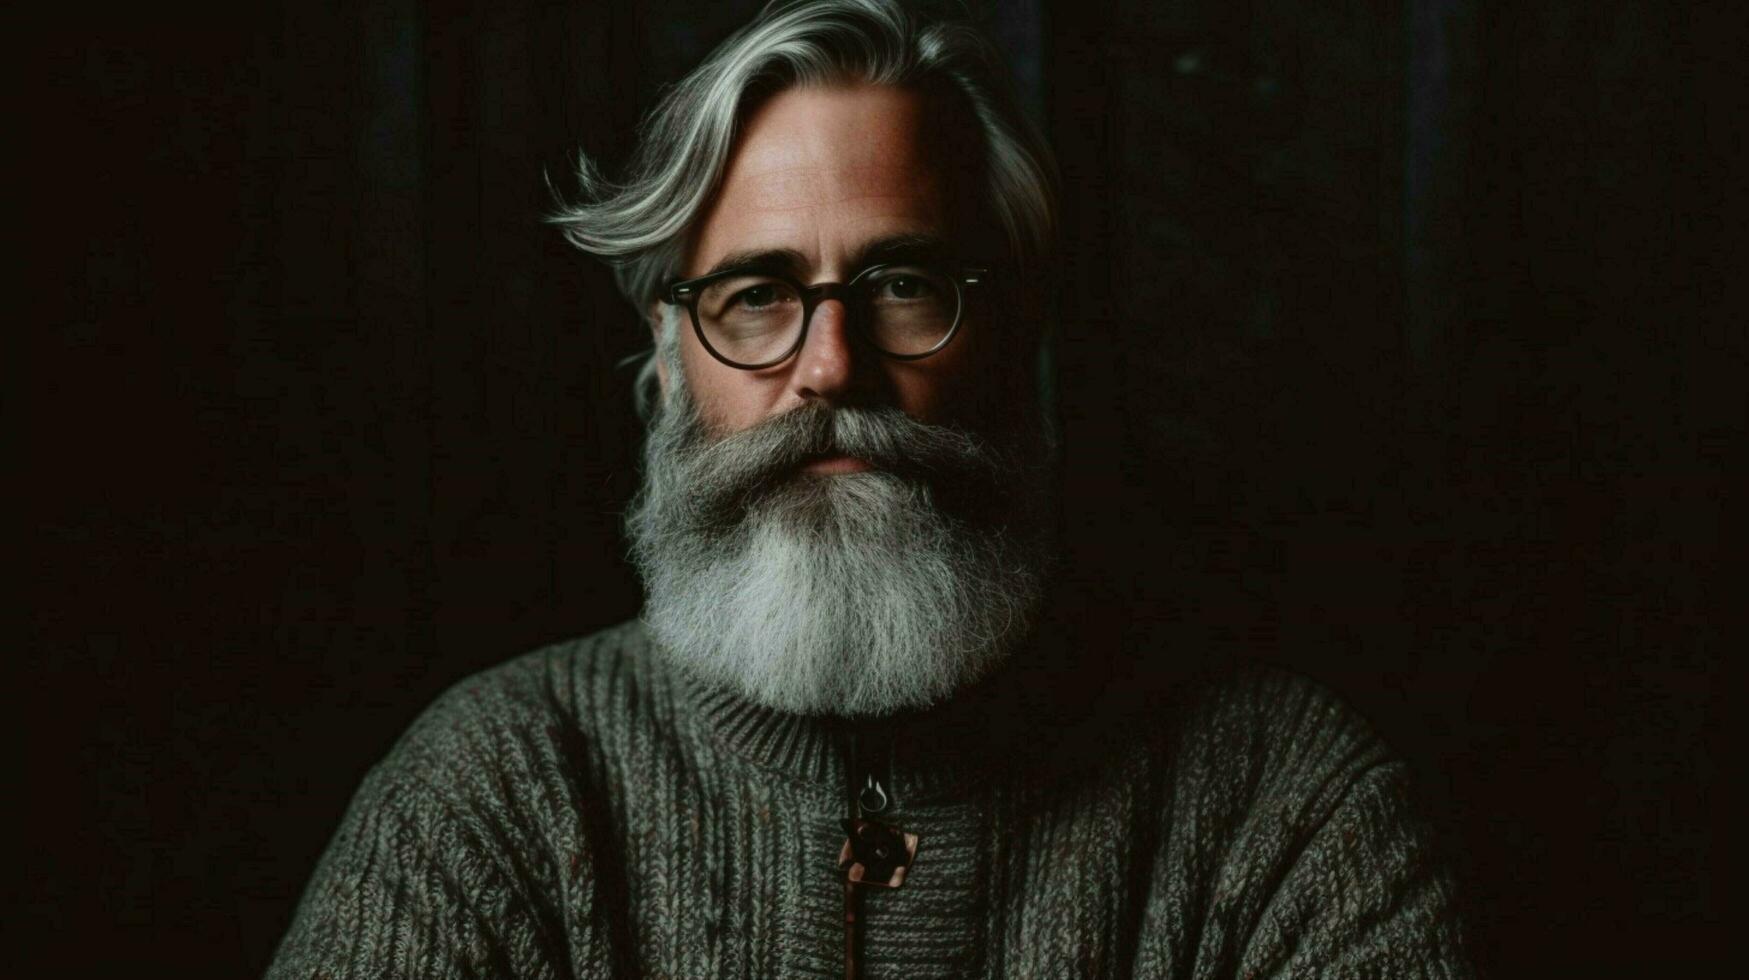 a man with glasses and a beard wearing a sweater photo